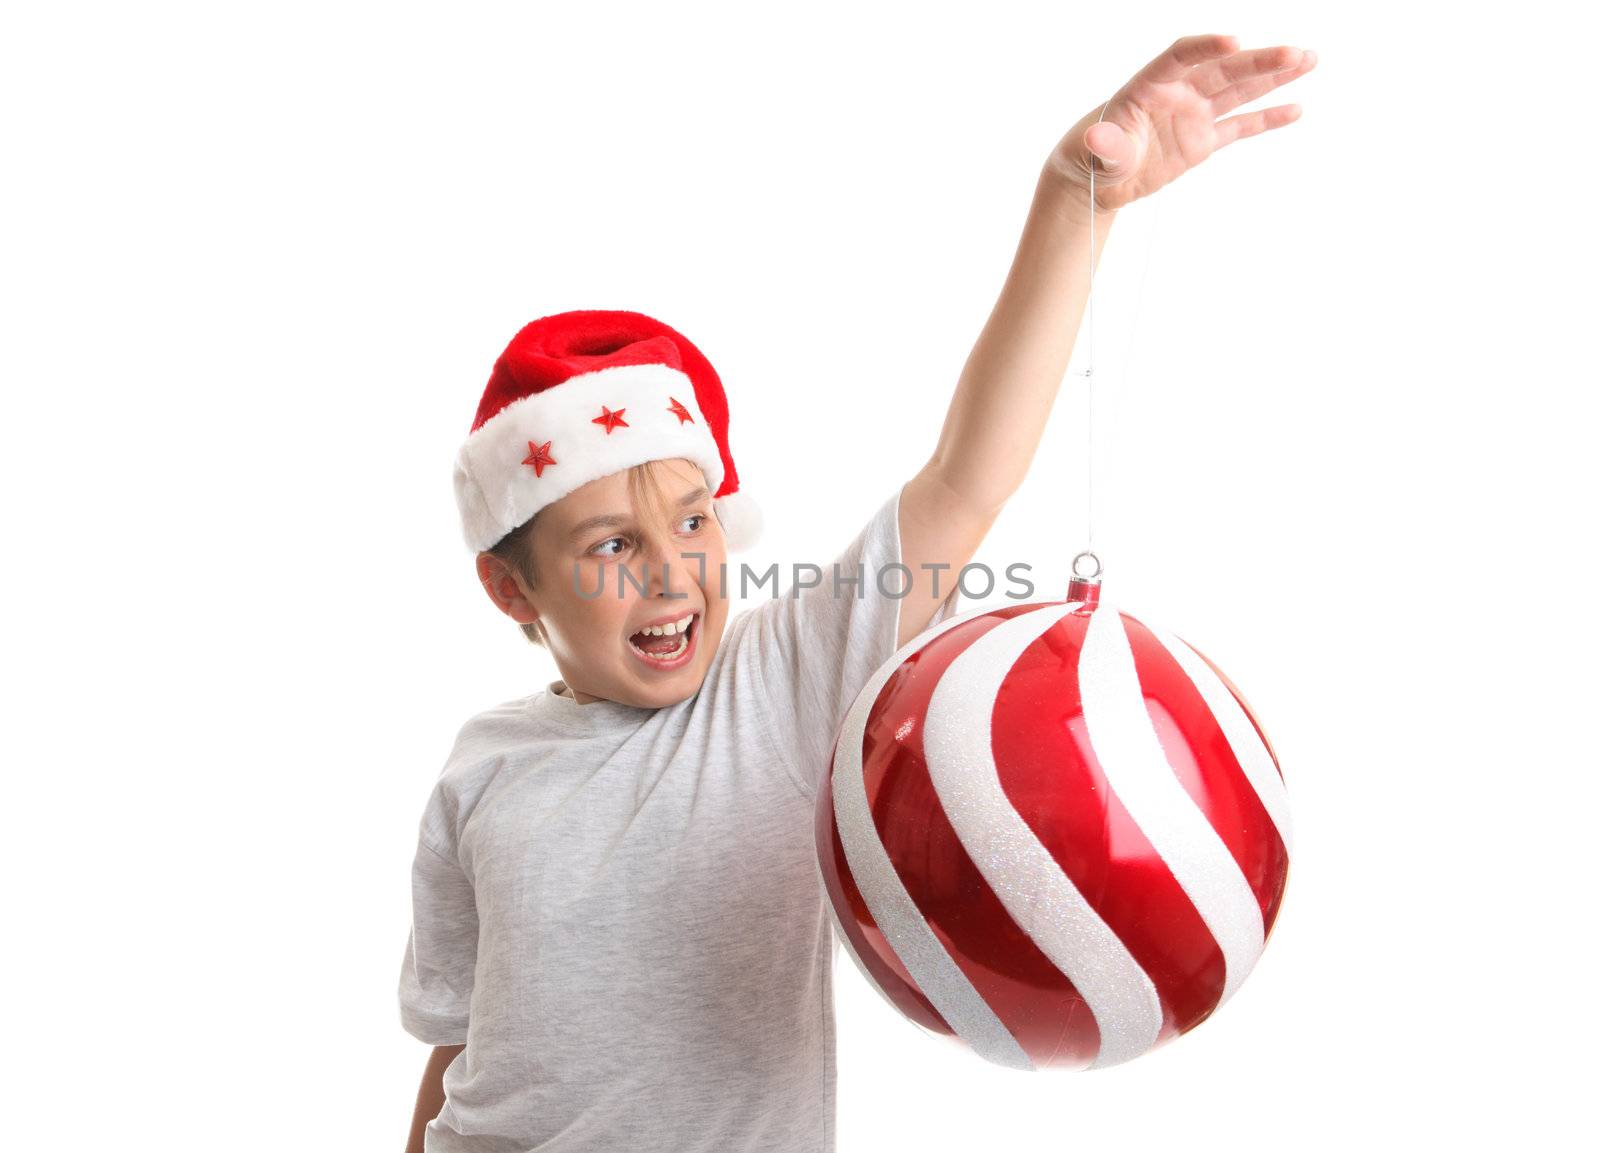 A enchanted child holding an oversized red and white swirled Christmas decoration in his hand.  